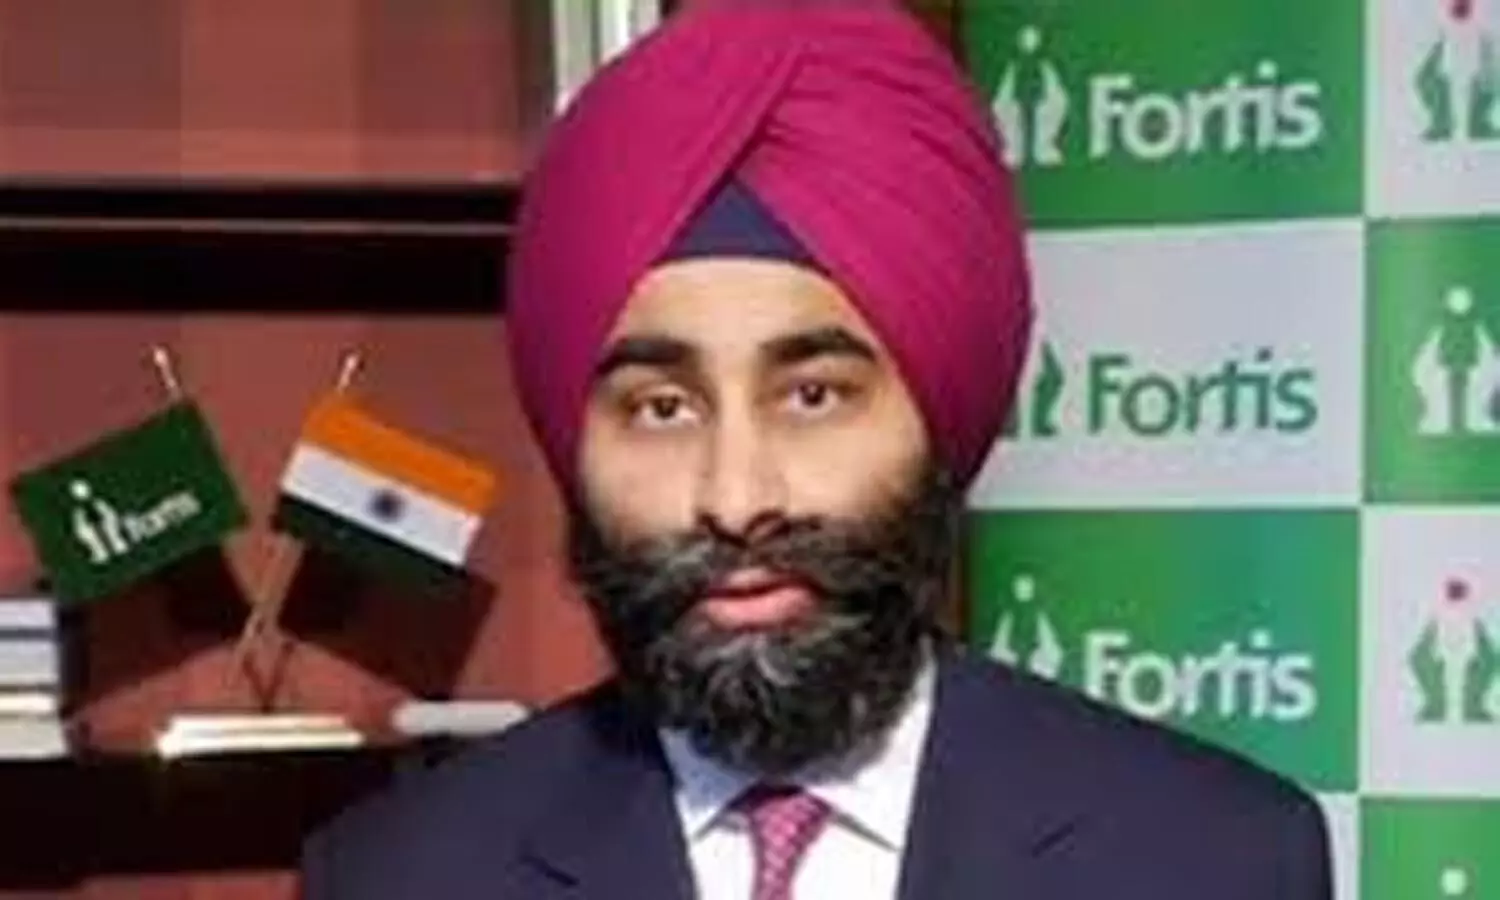 No Bail for Fortis Healthcare ex-promoter Shivinder Singh, accused in Rs 2400 crore fraud